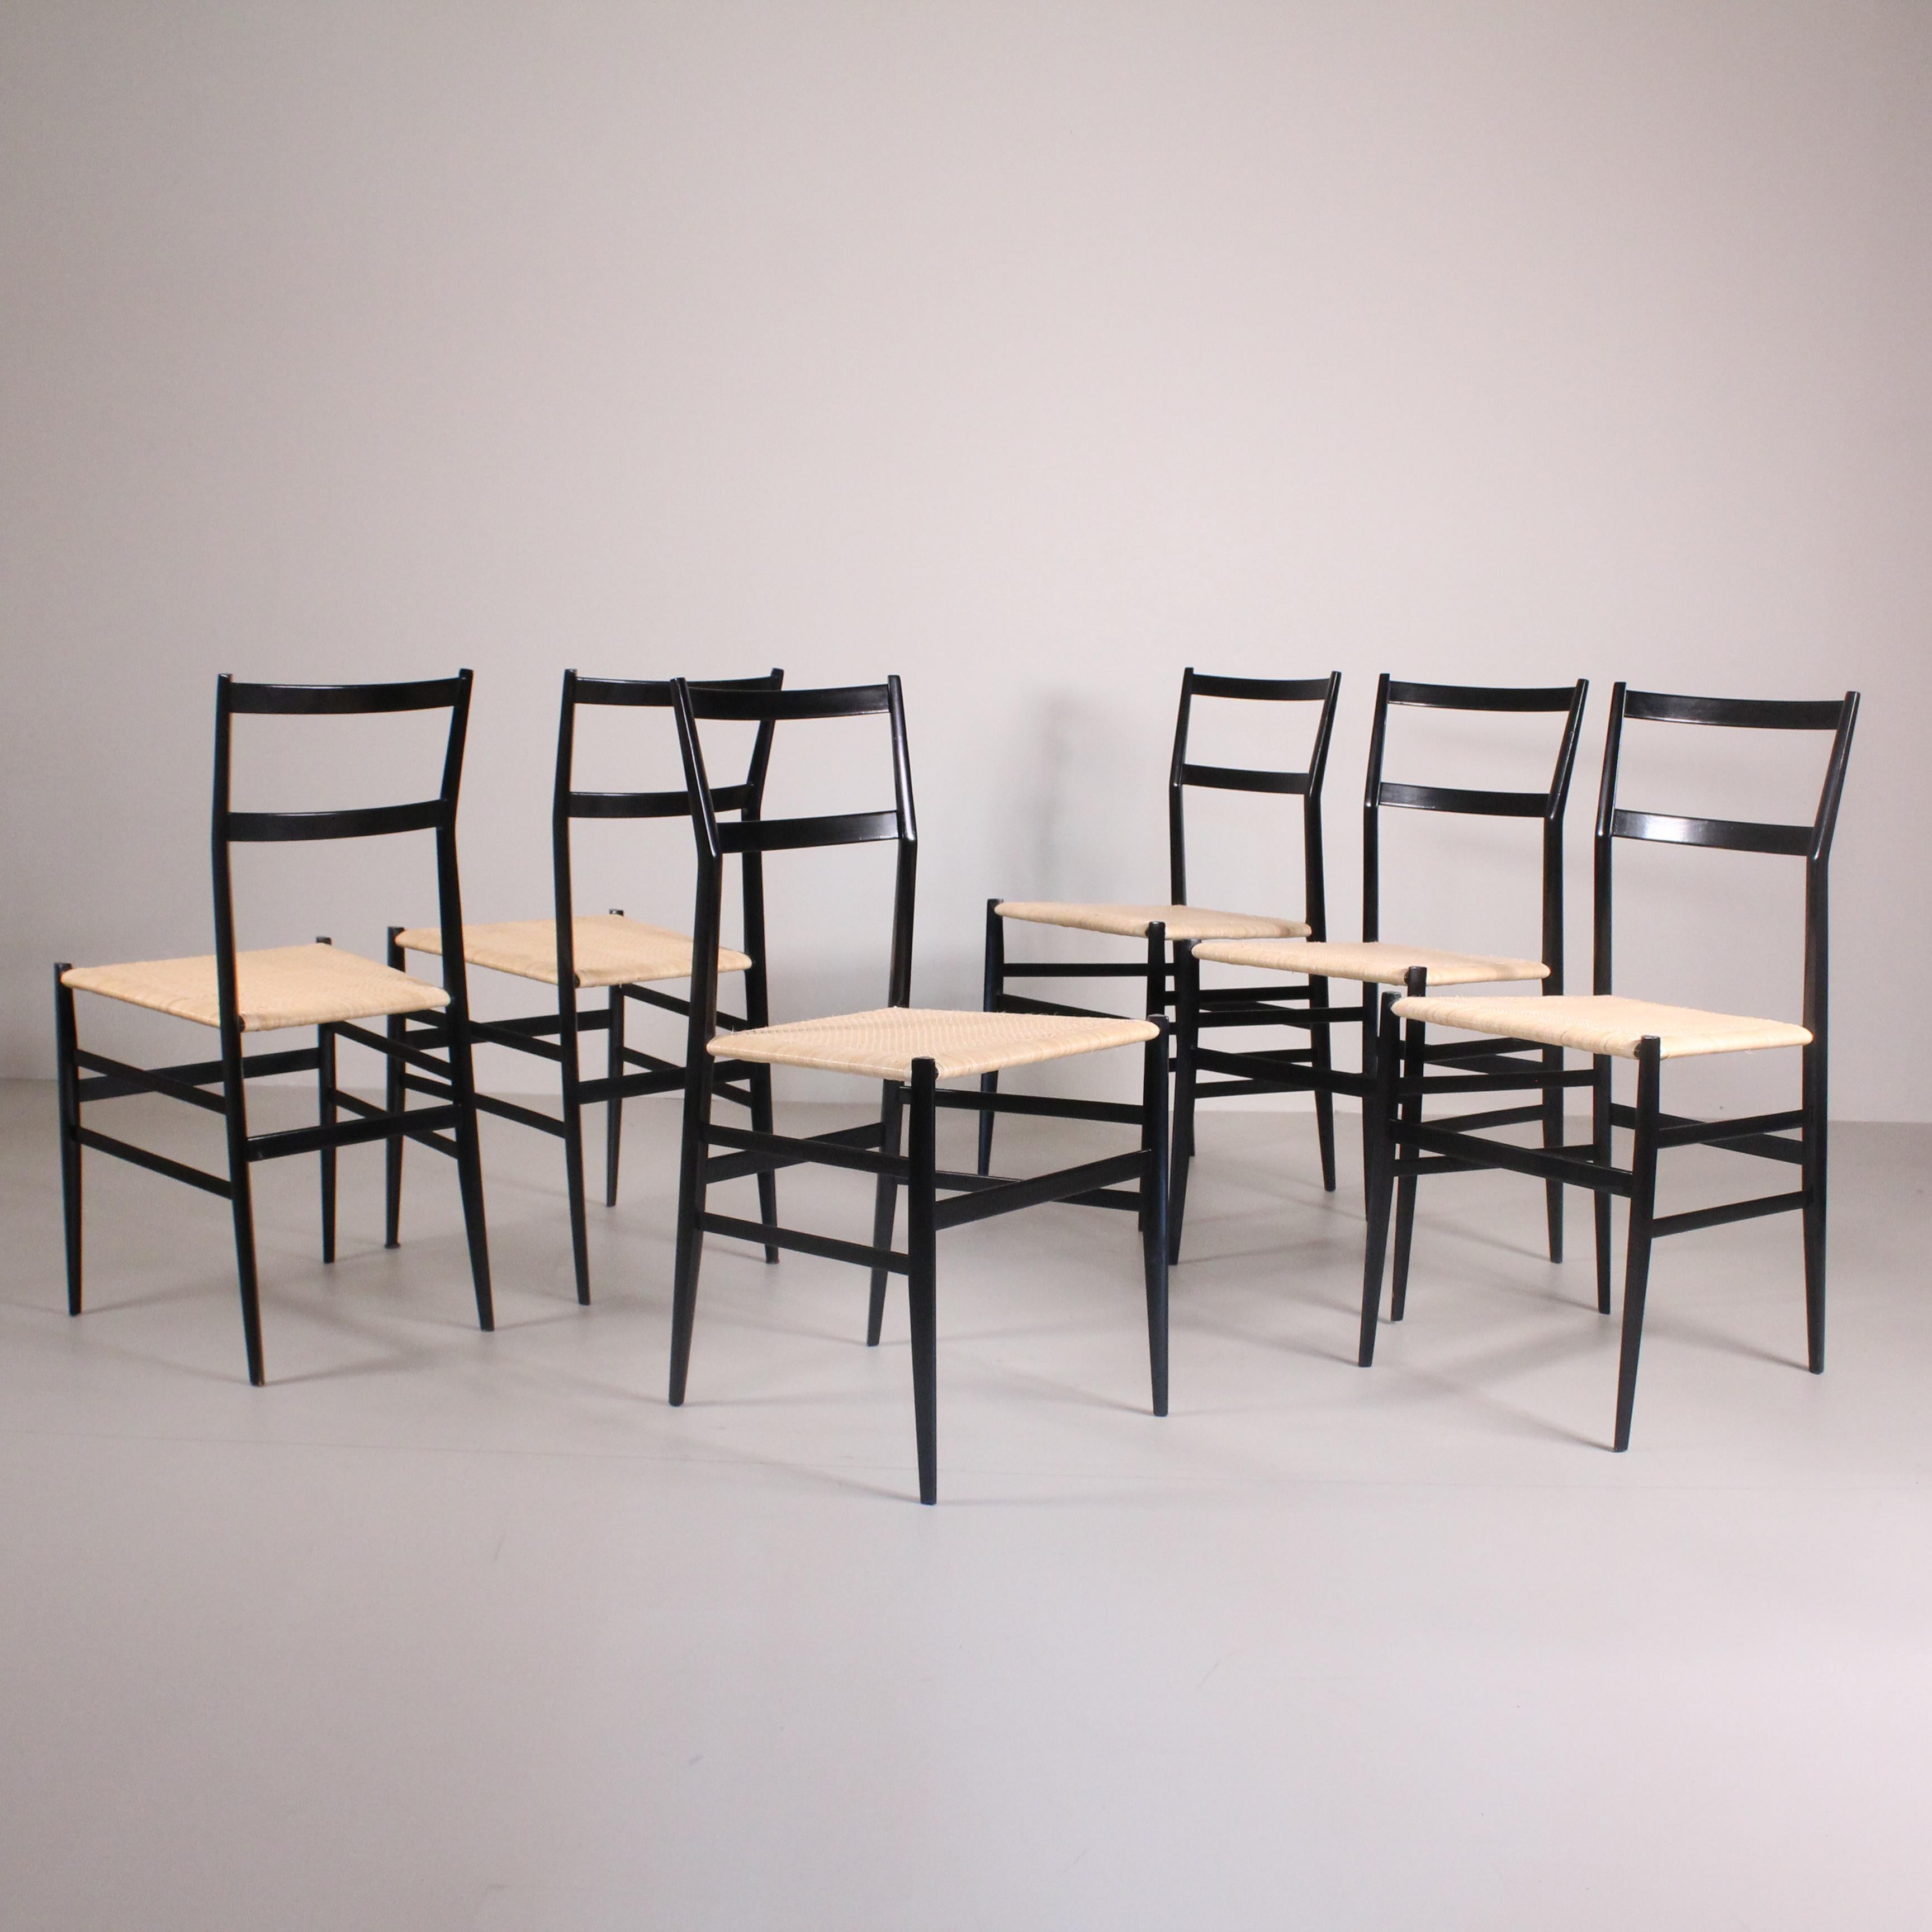 This incredible set of 6 Superleggera chairs designed by Gio Ponti for Cassina in 1950 embodies the elegance and lightness of modern aesthetics. These iconic chairs feature clean, sleek lines that reflect the mastery of postwar Italian design. Made